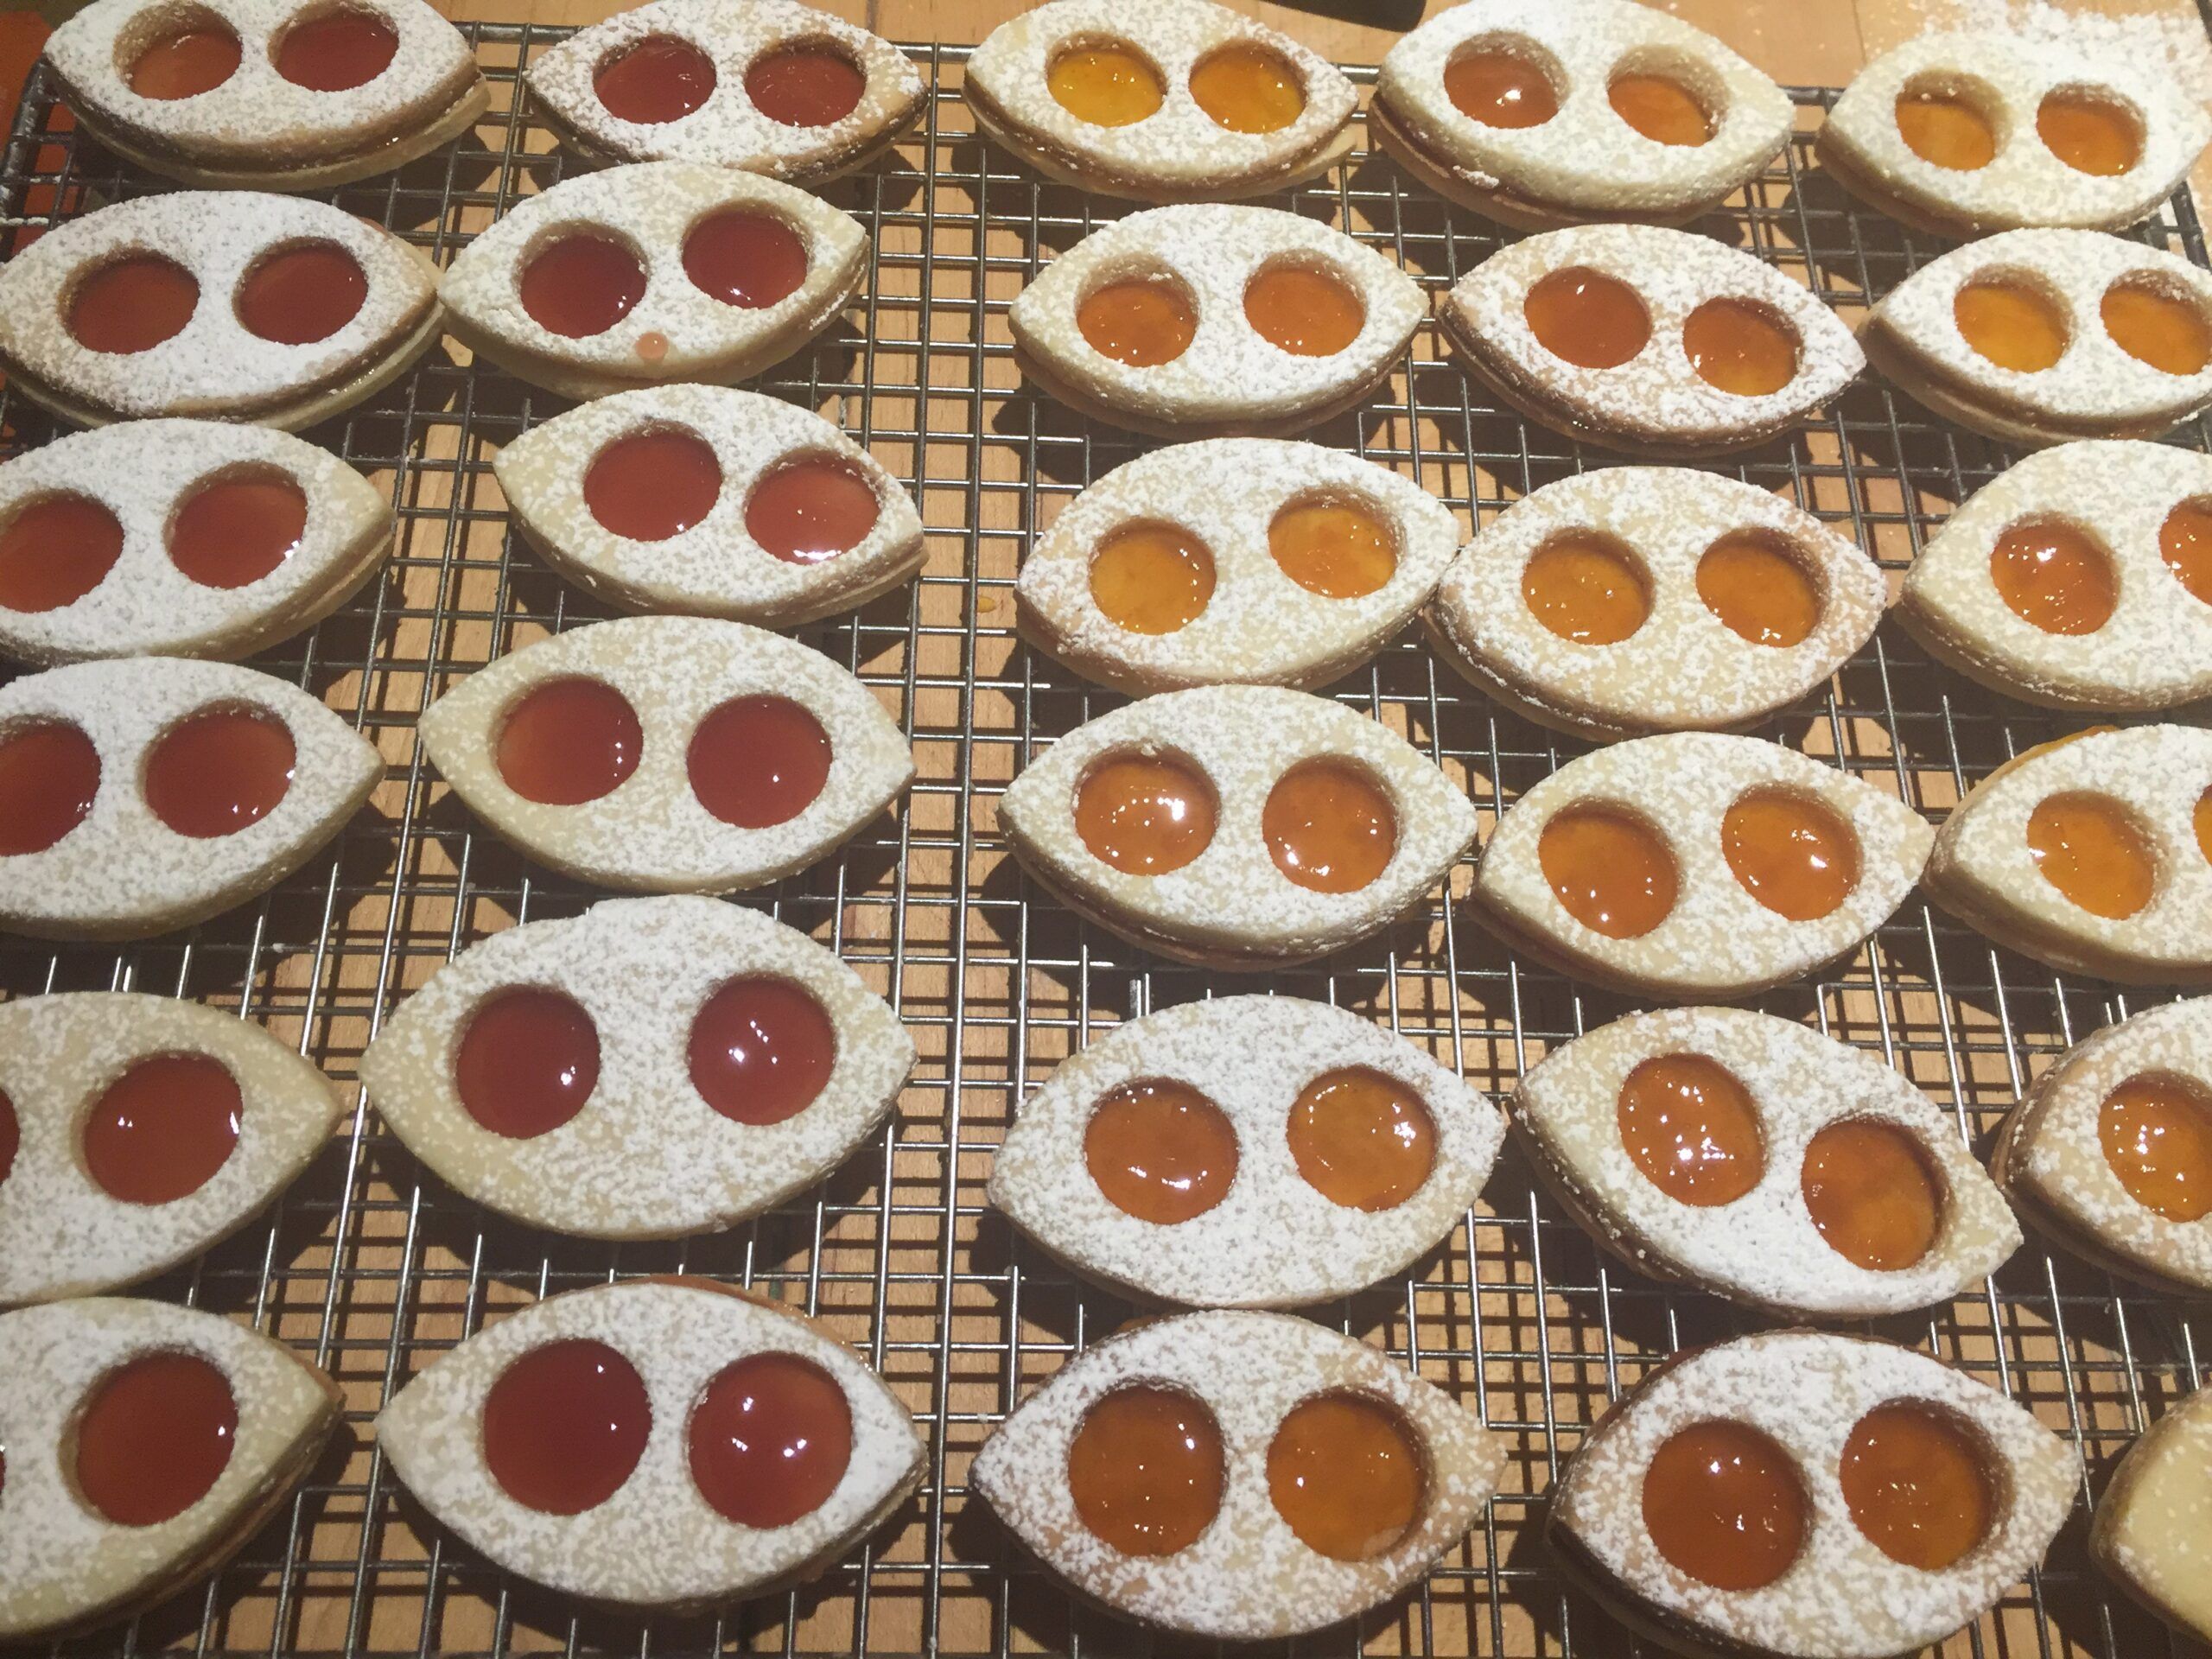 A tray of tear-dropped shaped sandwich cookies, each with two small circles cut out of the tops. Some are filled with red raspberry jam, others with golden apricot jam. Photo taken by me.